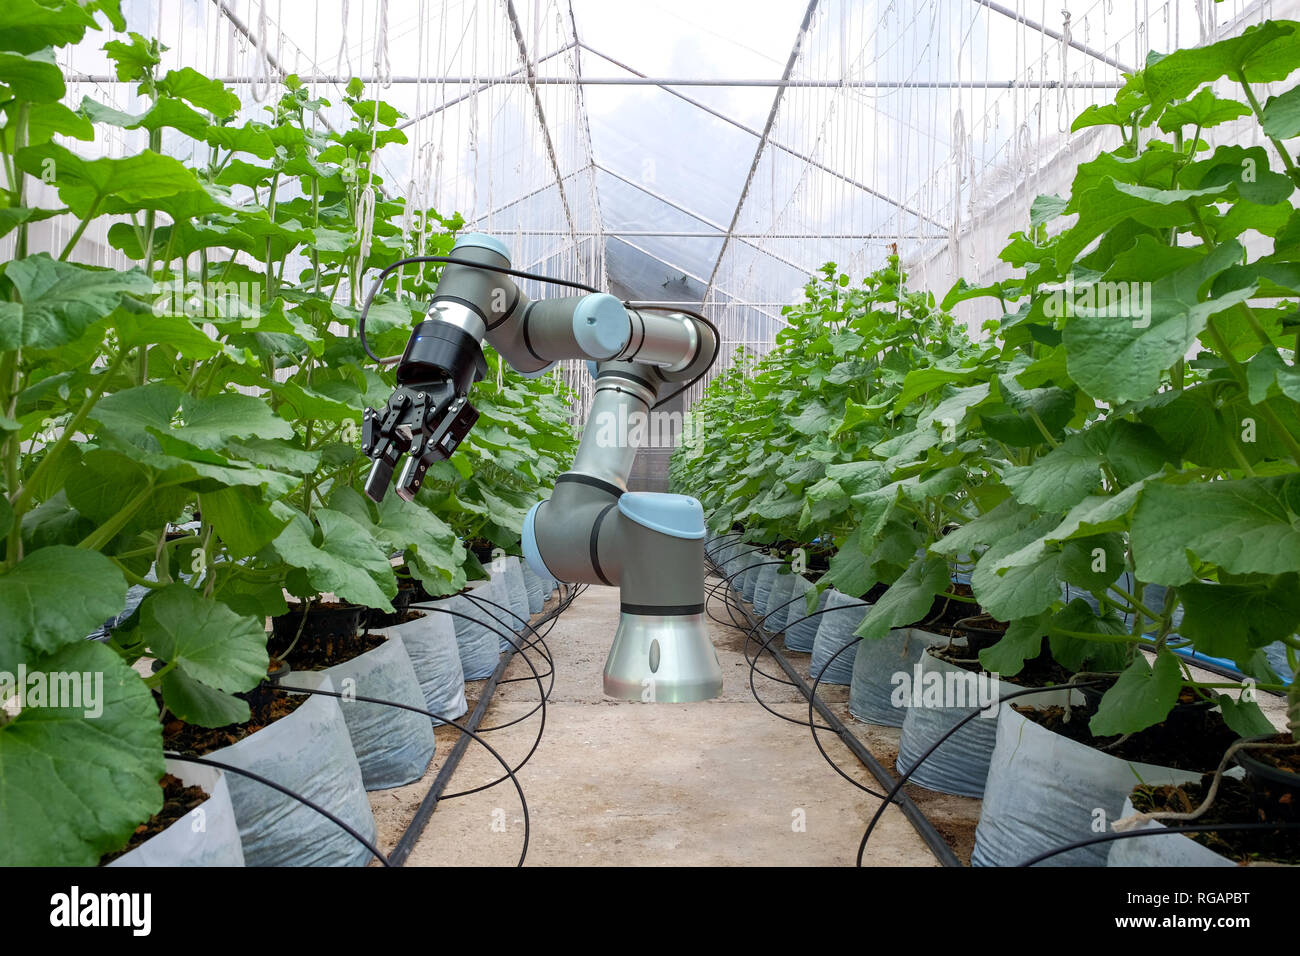 Smart robot installed inside the greenhouse. For the care and help farmers harvest the melon, smart farm on farming 4.0 concept. Stock Photo